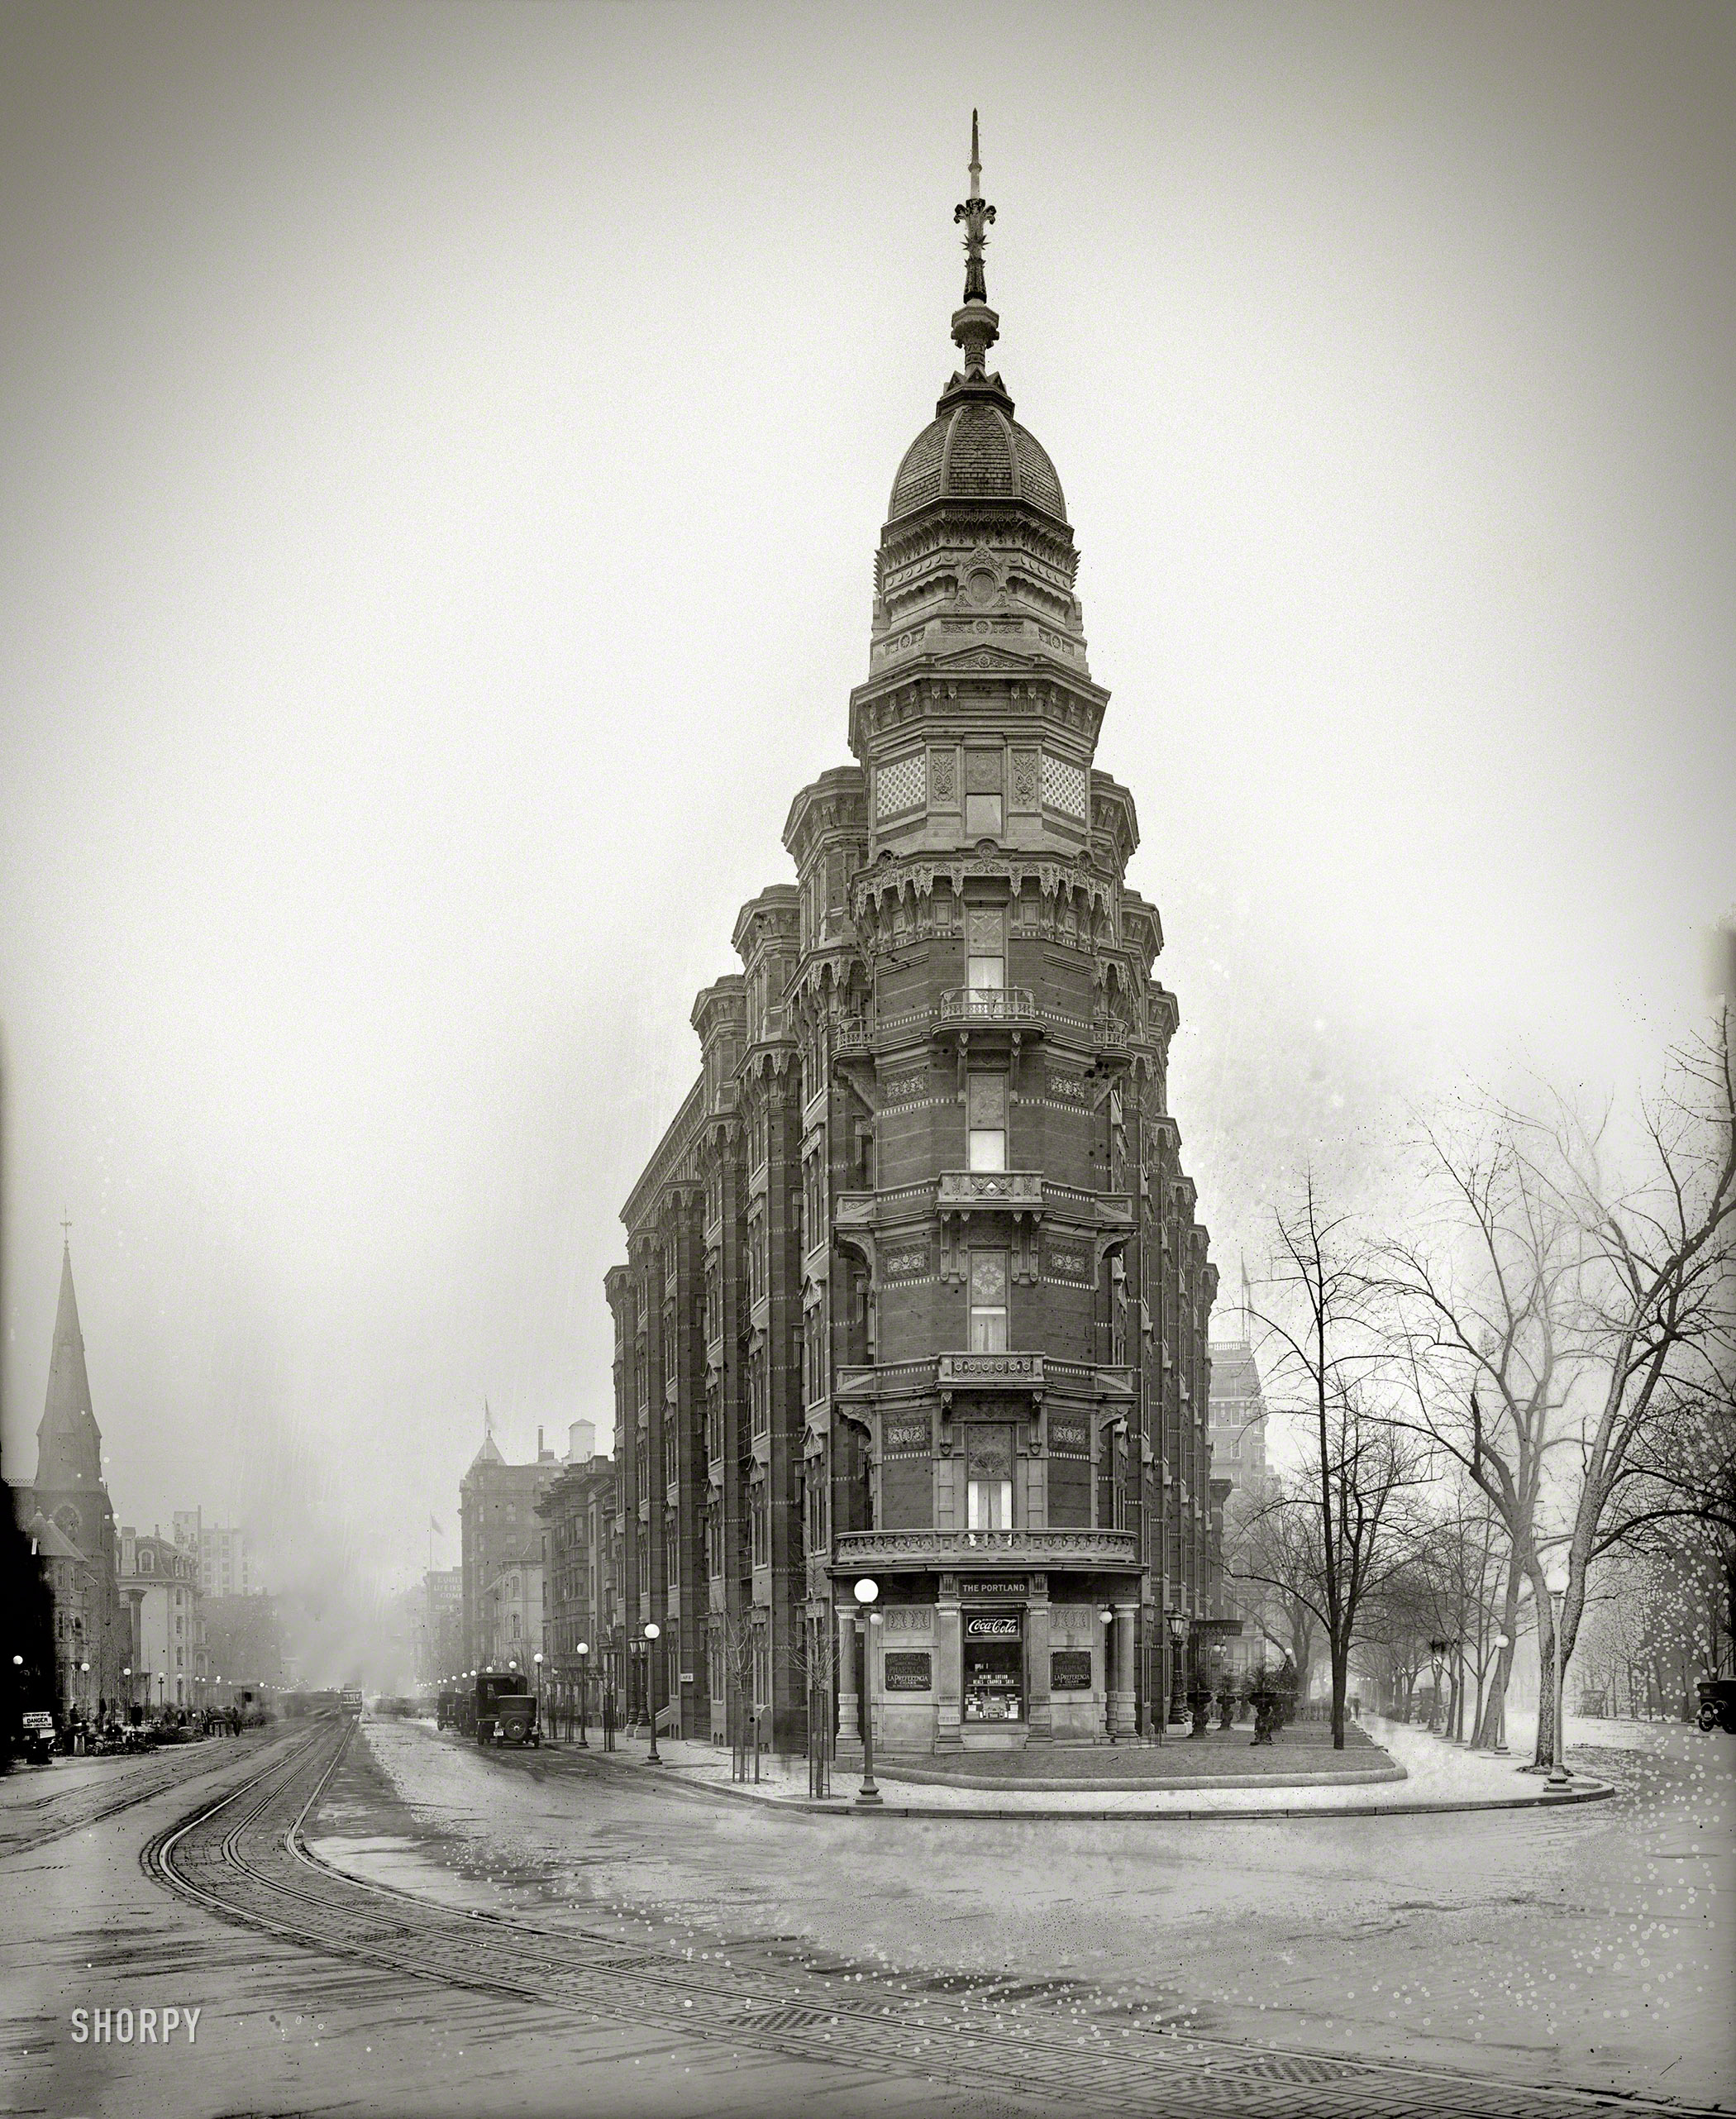 Washington, D.C., circa 1917. "Portland Apartments, 14th Street & Thomas Circle." Mold on the emulsion lends an eerie aura to this already spooky-looking structure (also seen here). National Photo Company Collection glass negative. View full size.